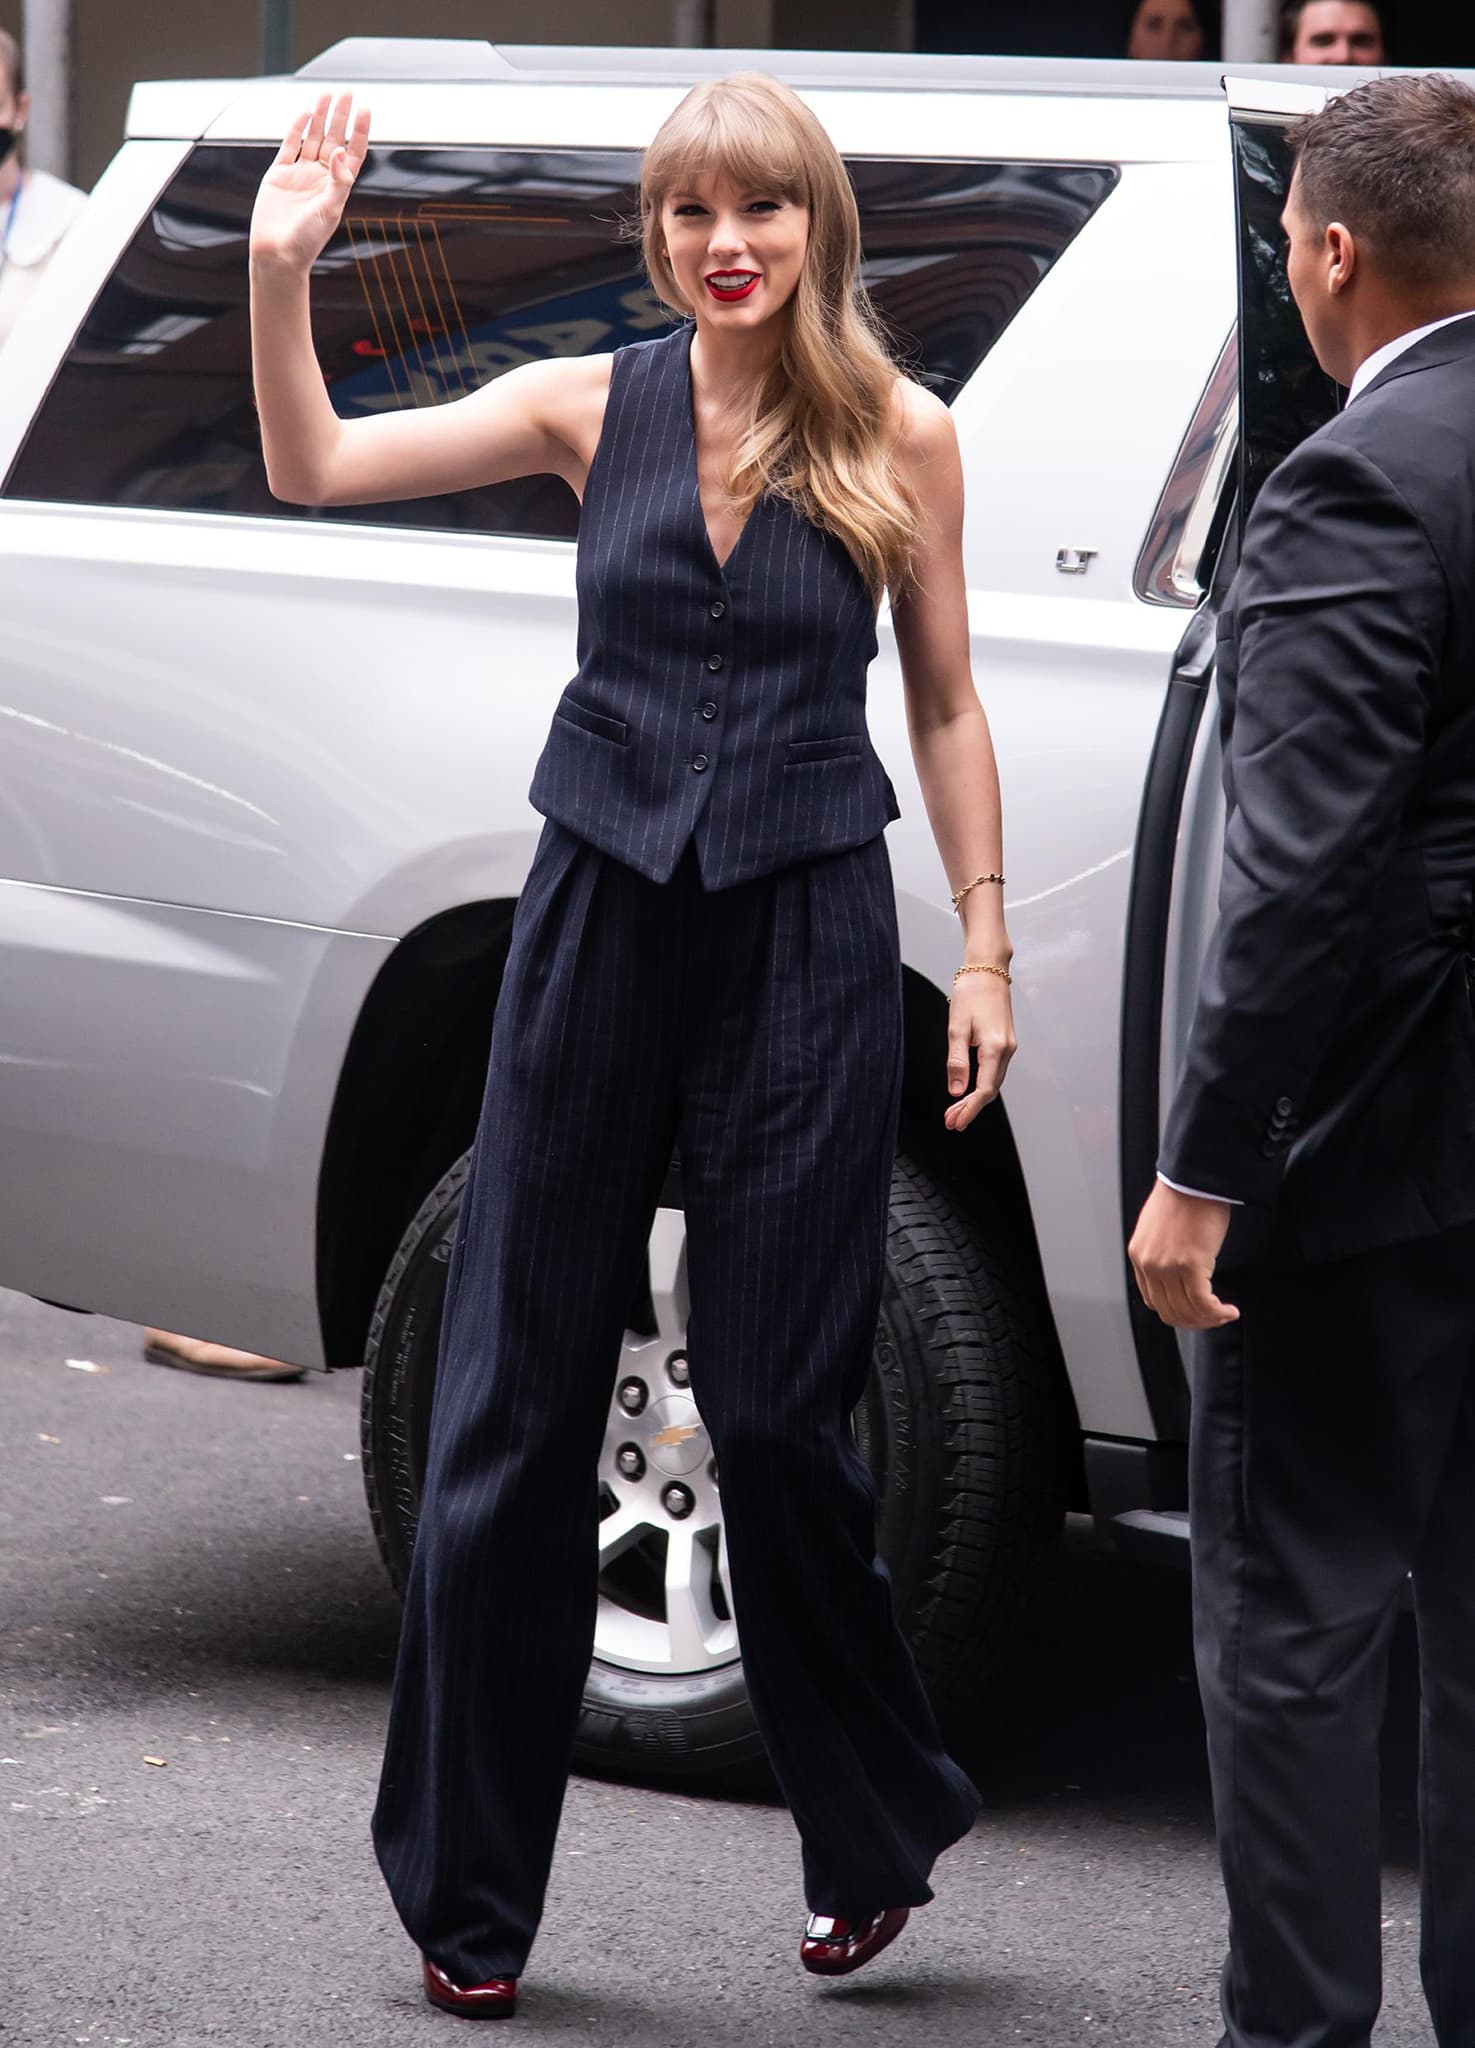 Taylor Swift opts for a boss lady look in Max Mara navy pinstripe vest and matching trousers